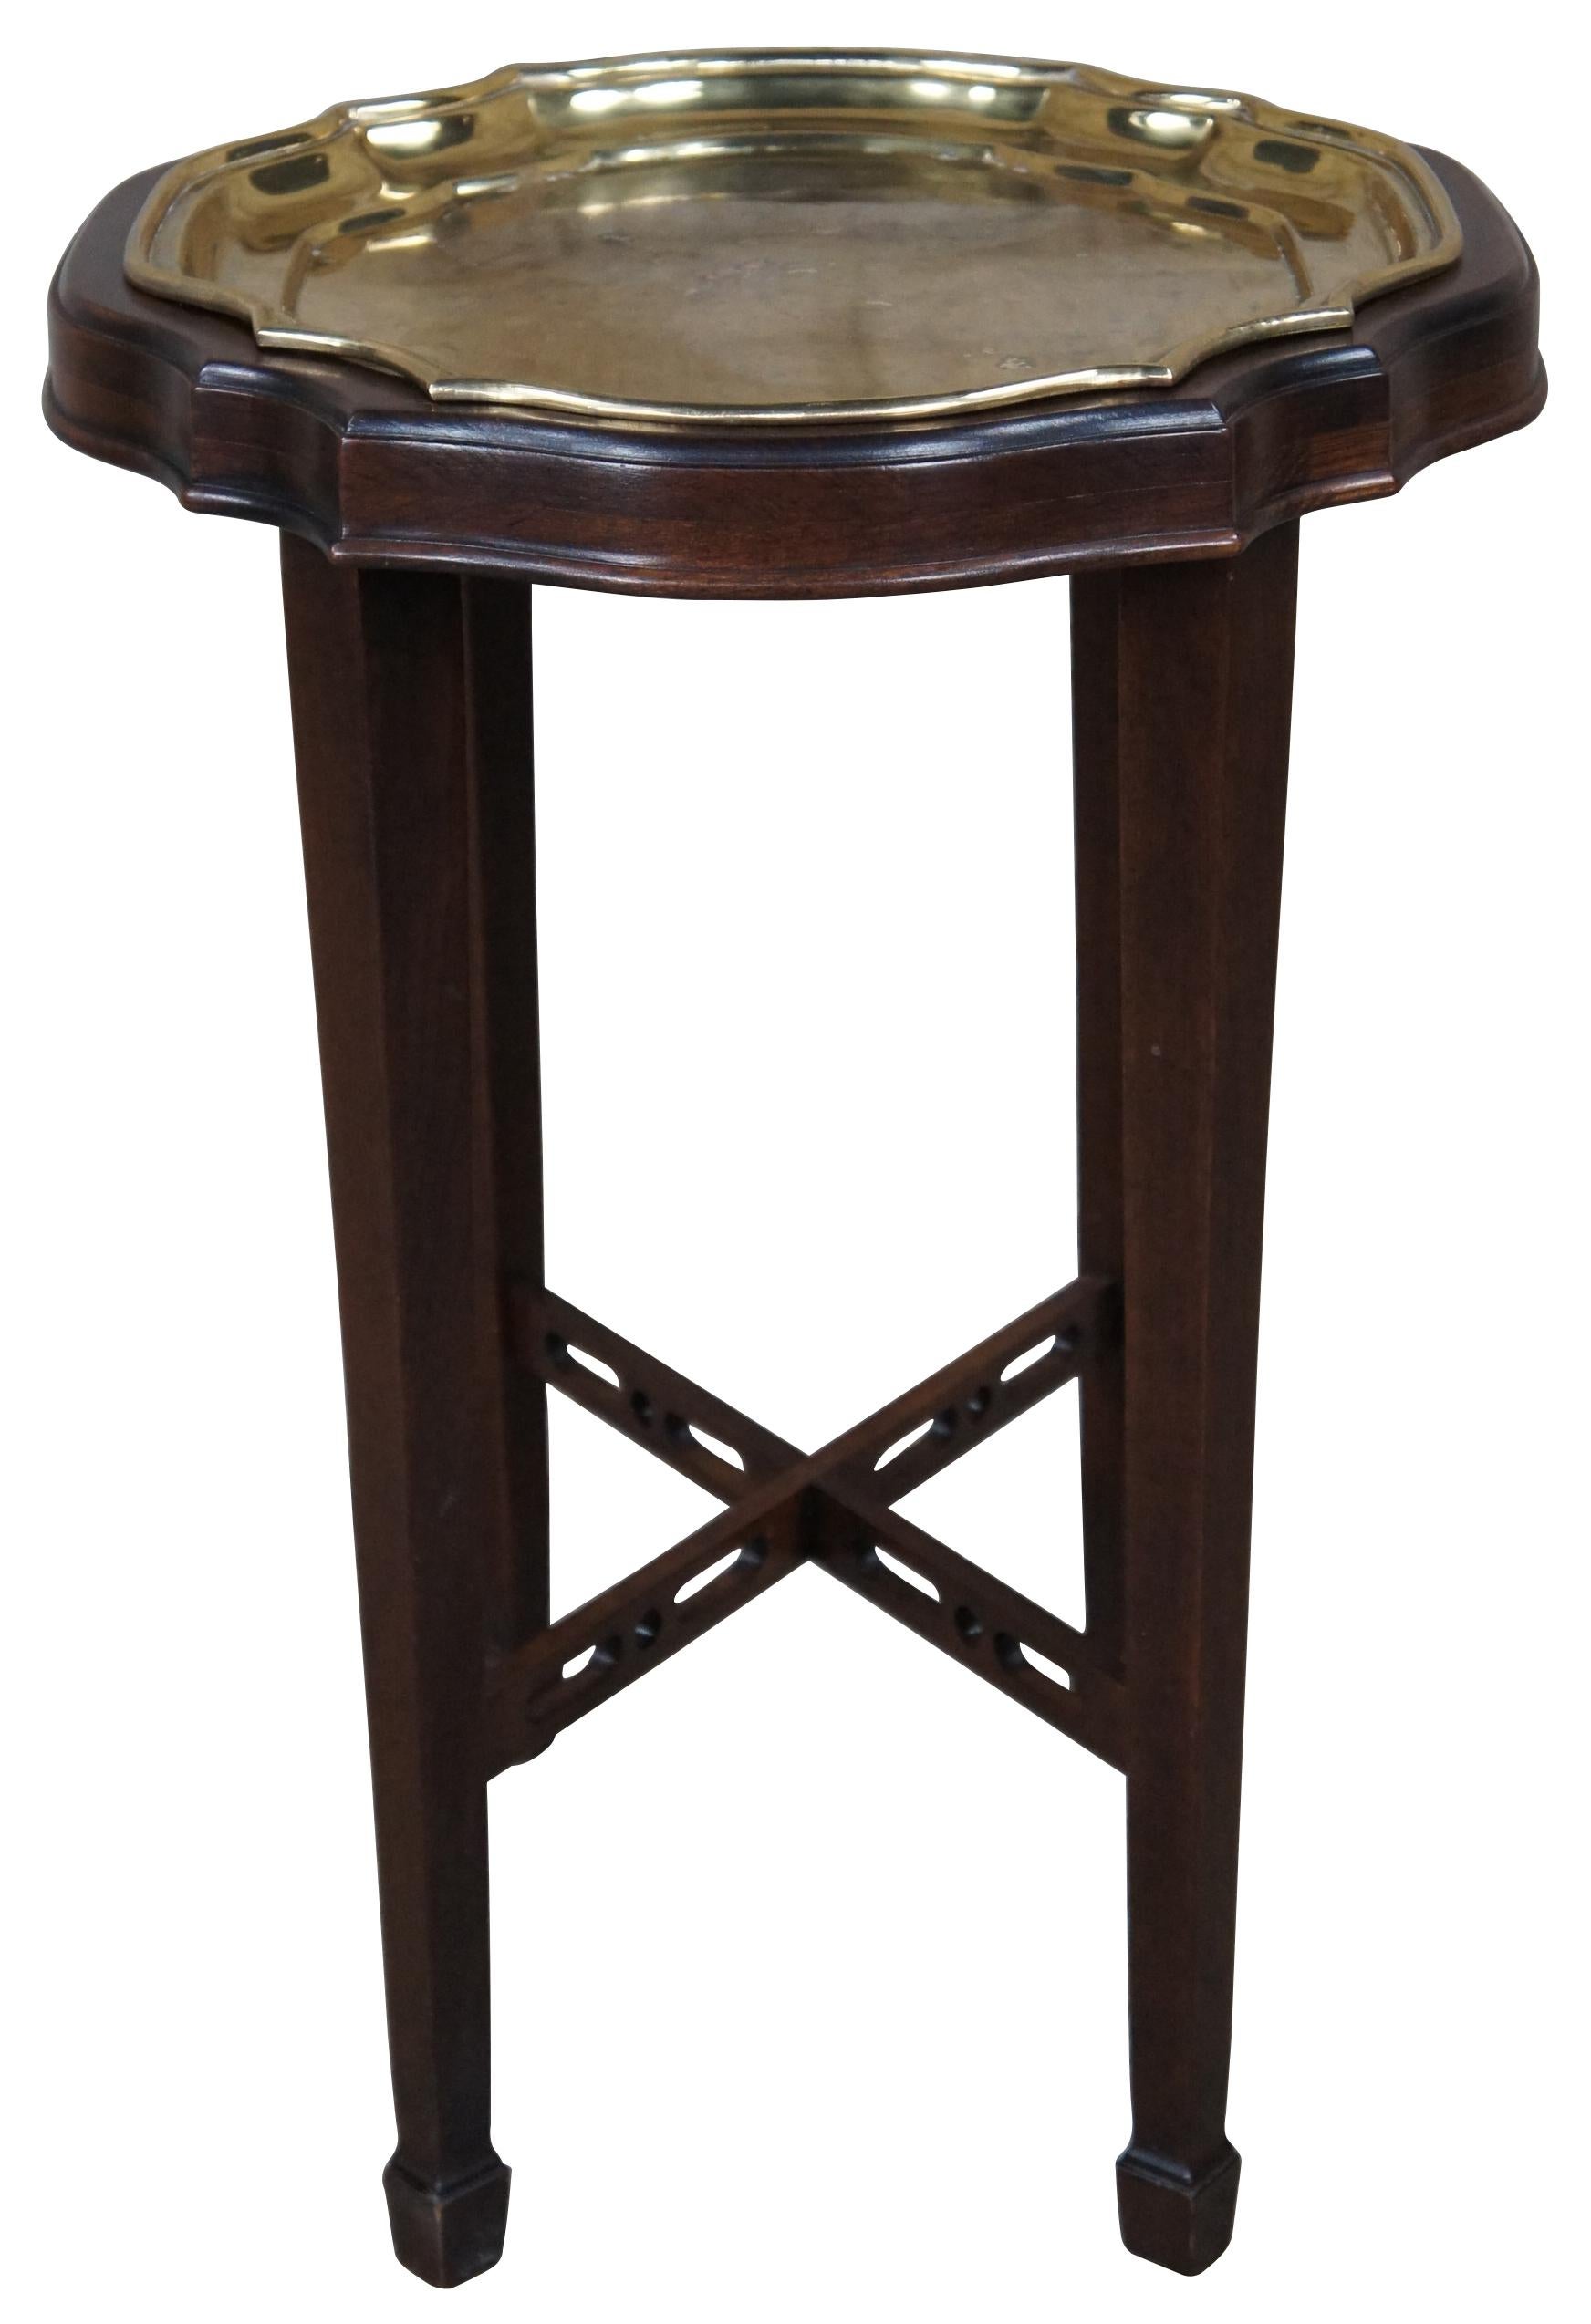 Vintage Ethan Allen Georgian Court plant stand or tray table. Made of cherry feauturing serpentine form with a brass tray table insert and reticulated stretcher. 11 3031. Measures: 22